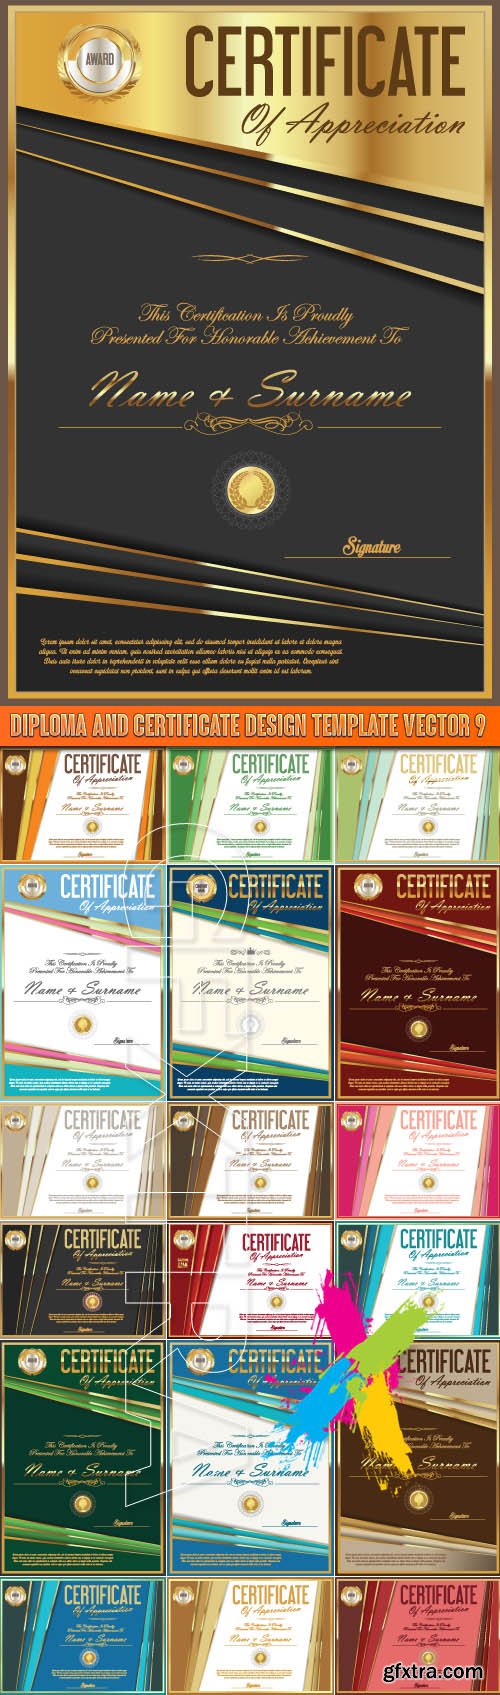 Diploma and certificate design template vector 9